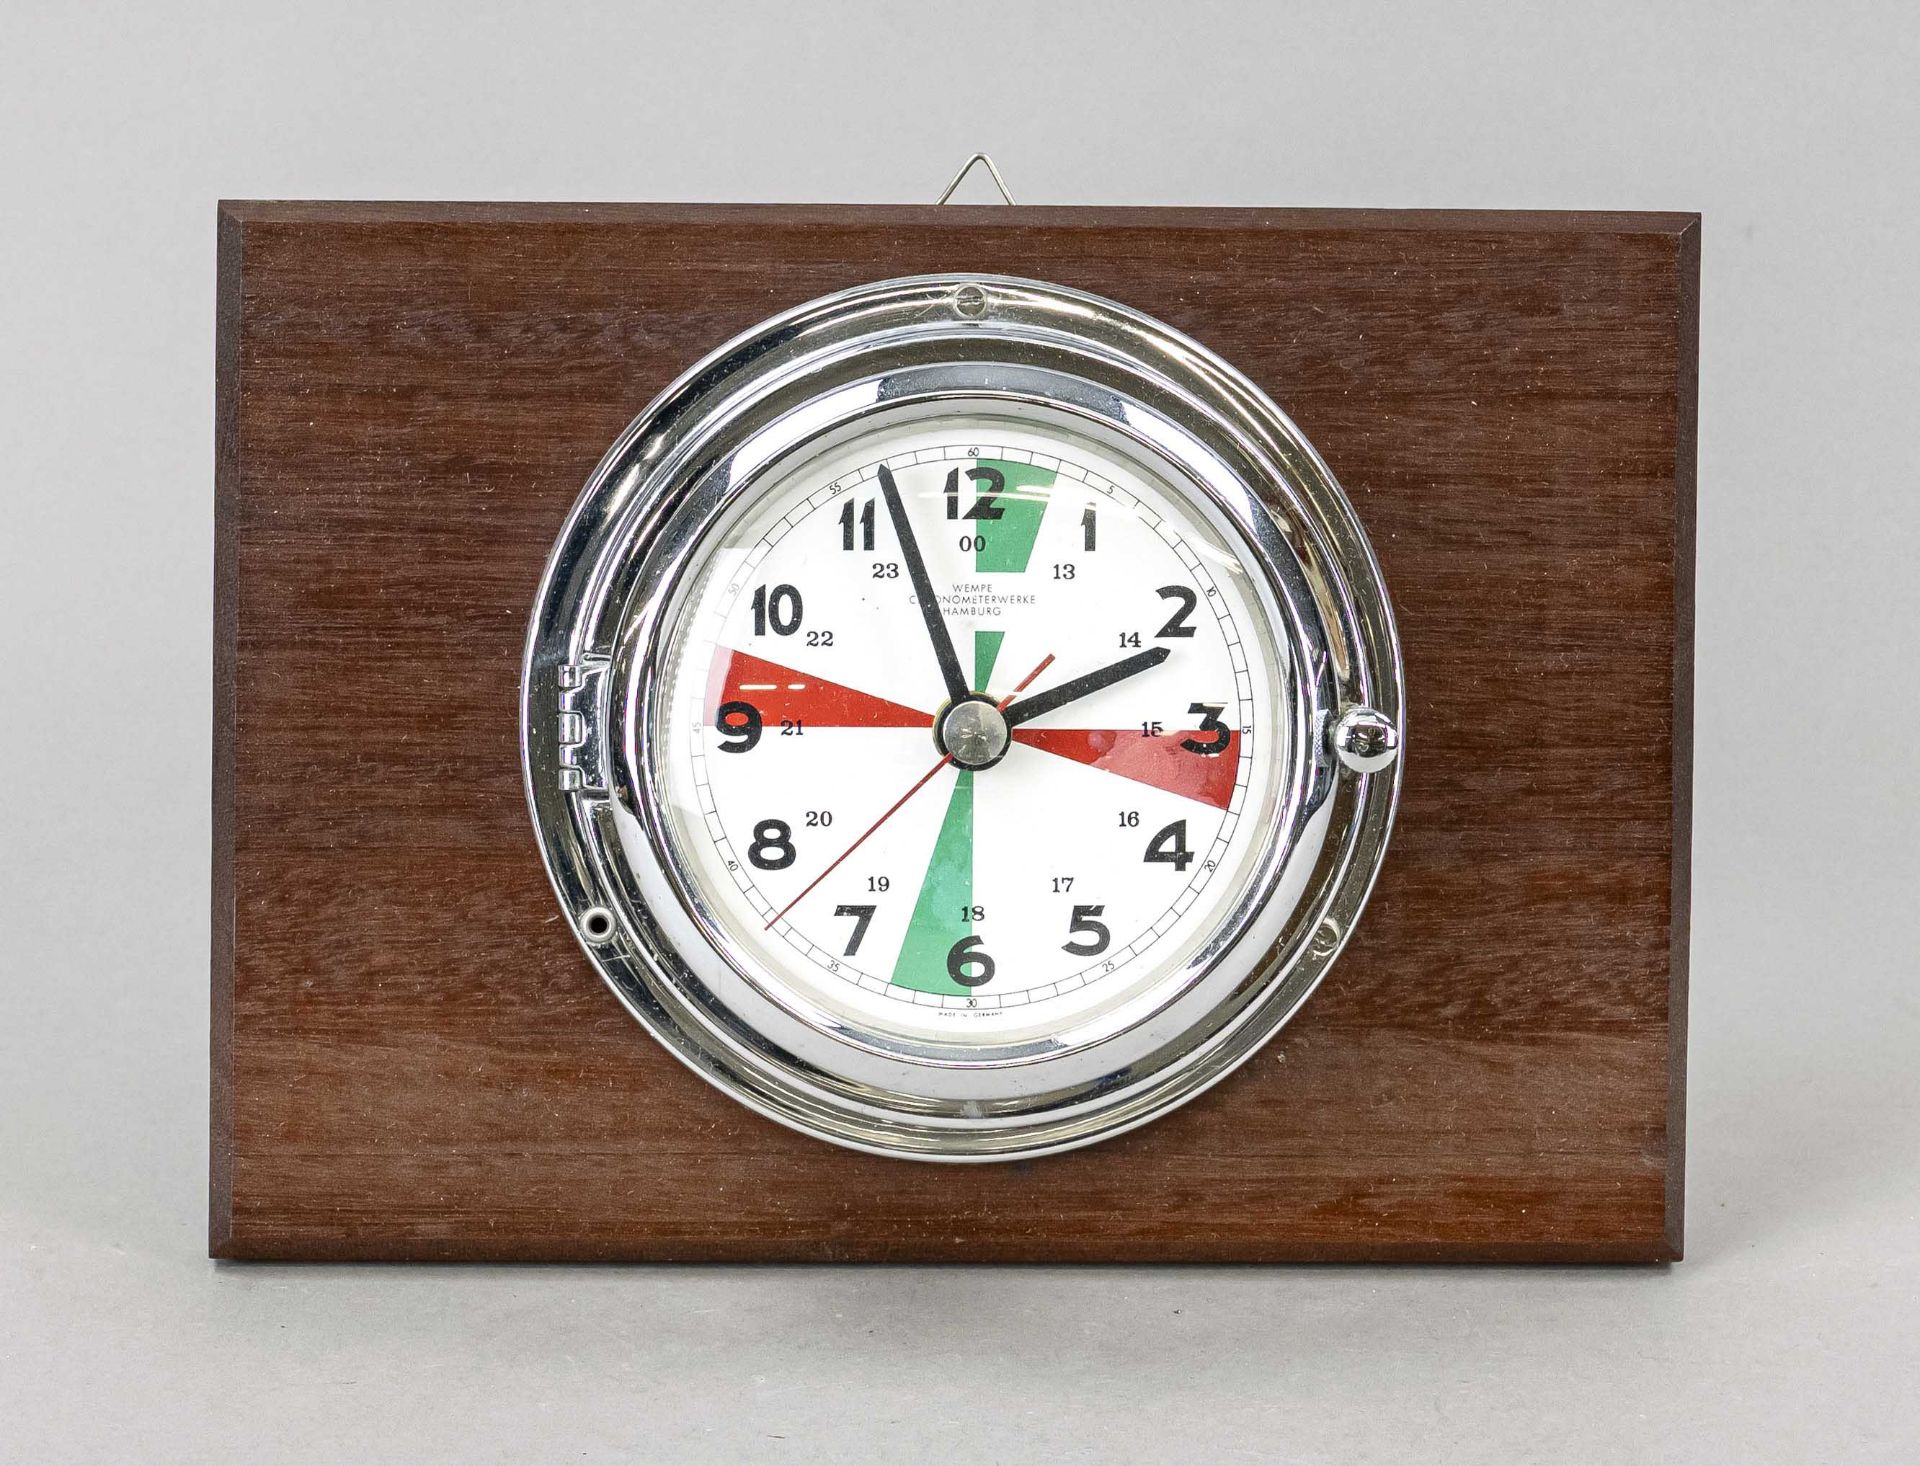 Wempe ship's clock, chrome-plated, quartz movement, battery probably empty, mounted on wood, white